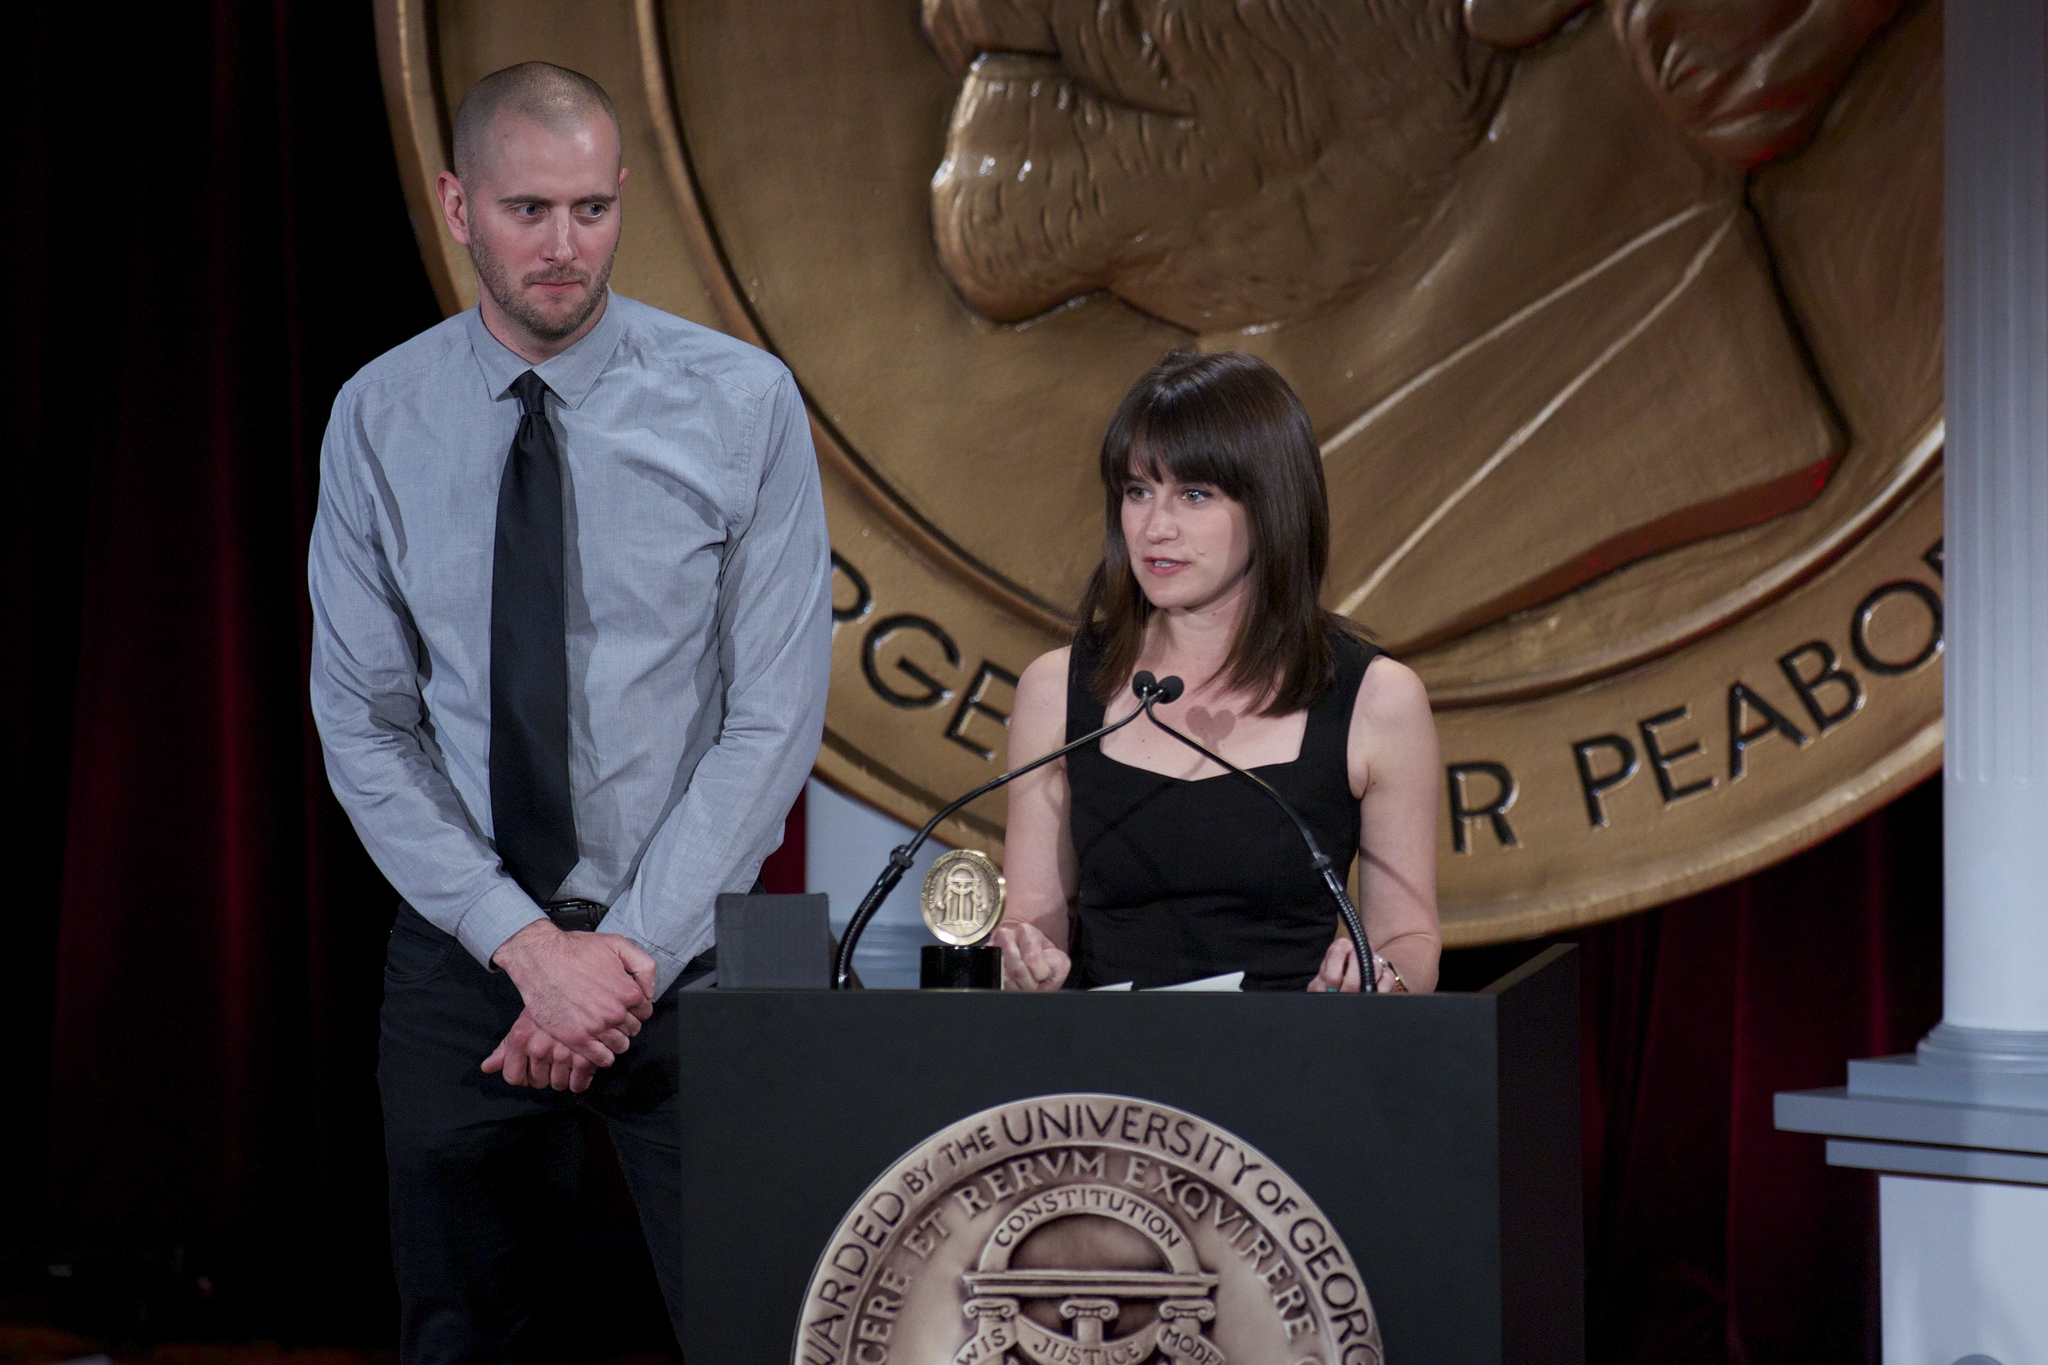 Jeff Soyk and Elaine Sheldon accept the Peabody Award for the interactive documentary 